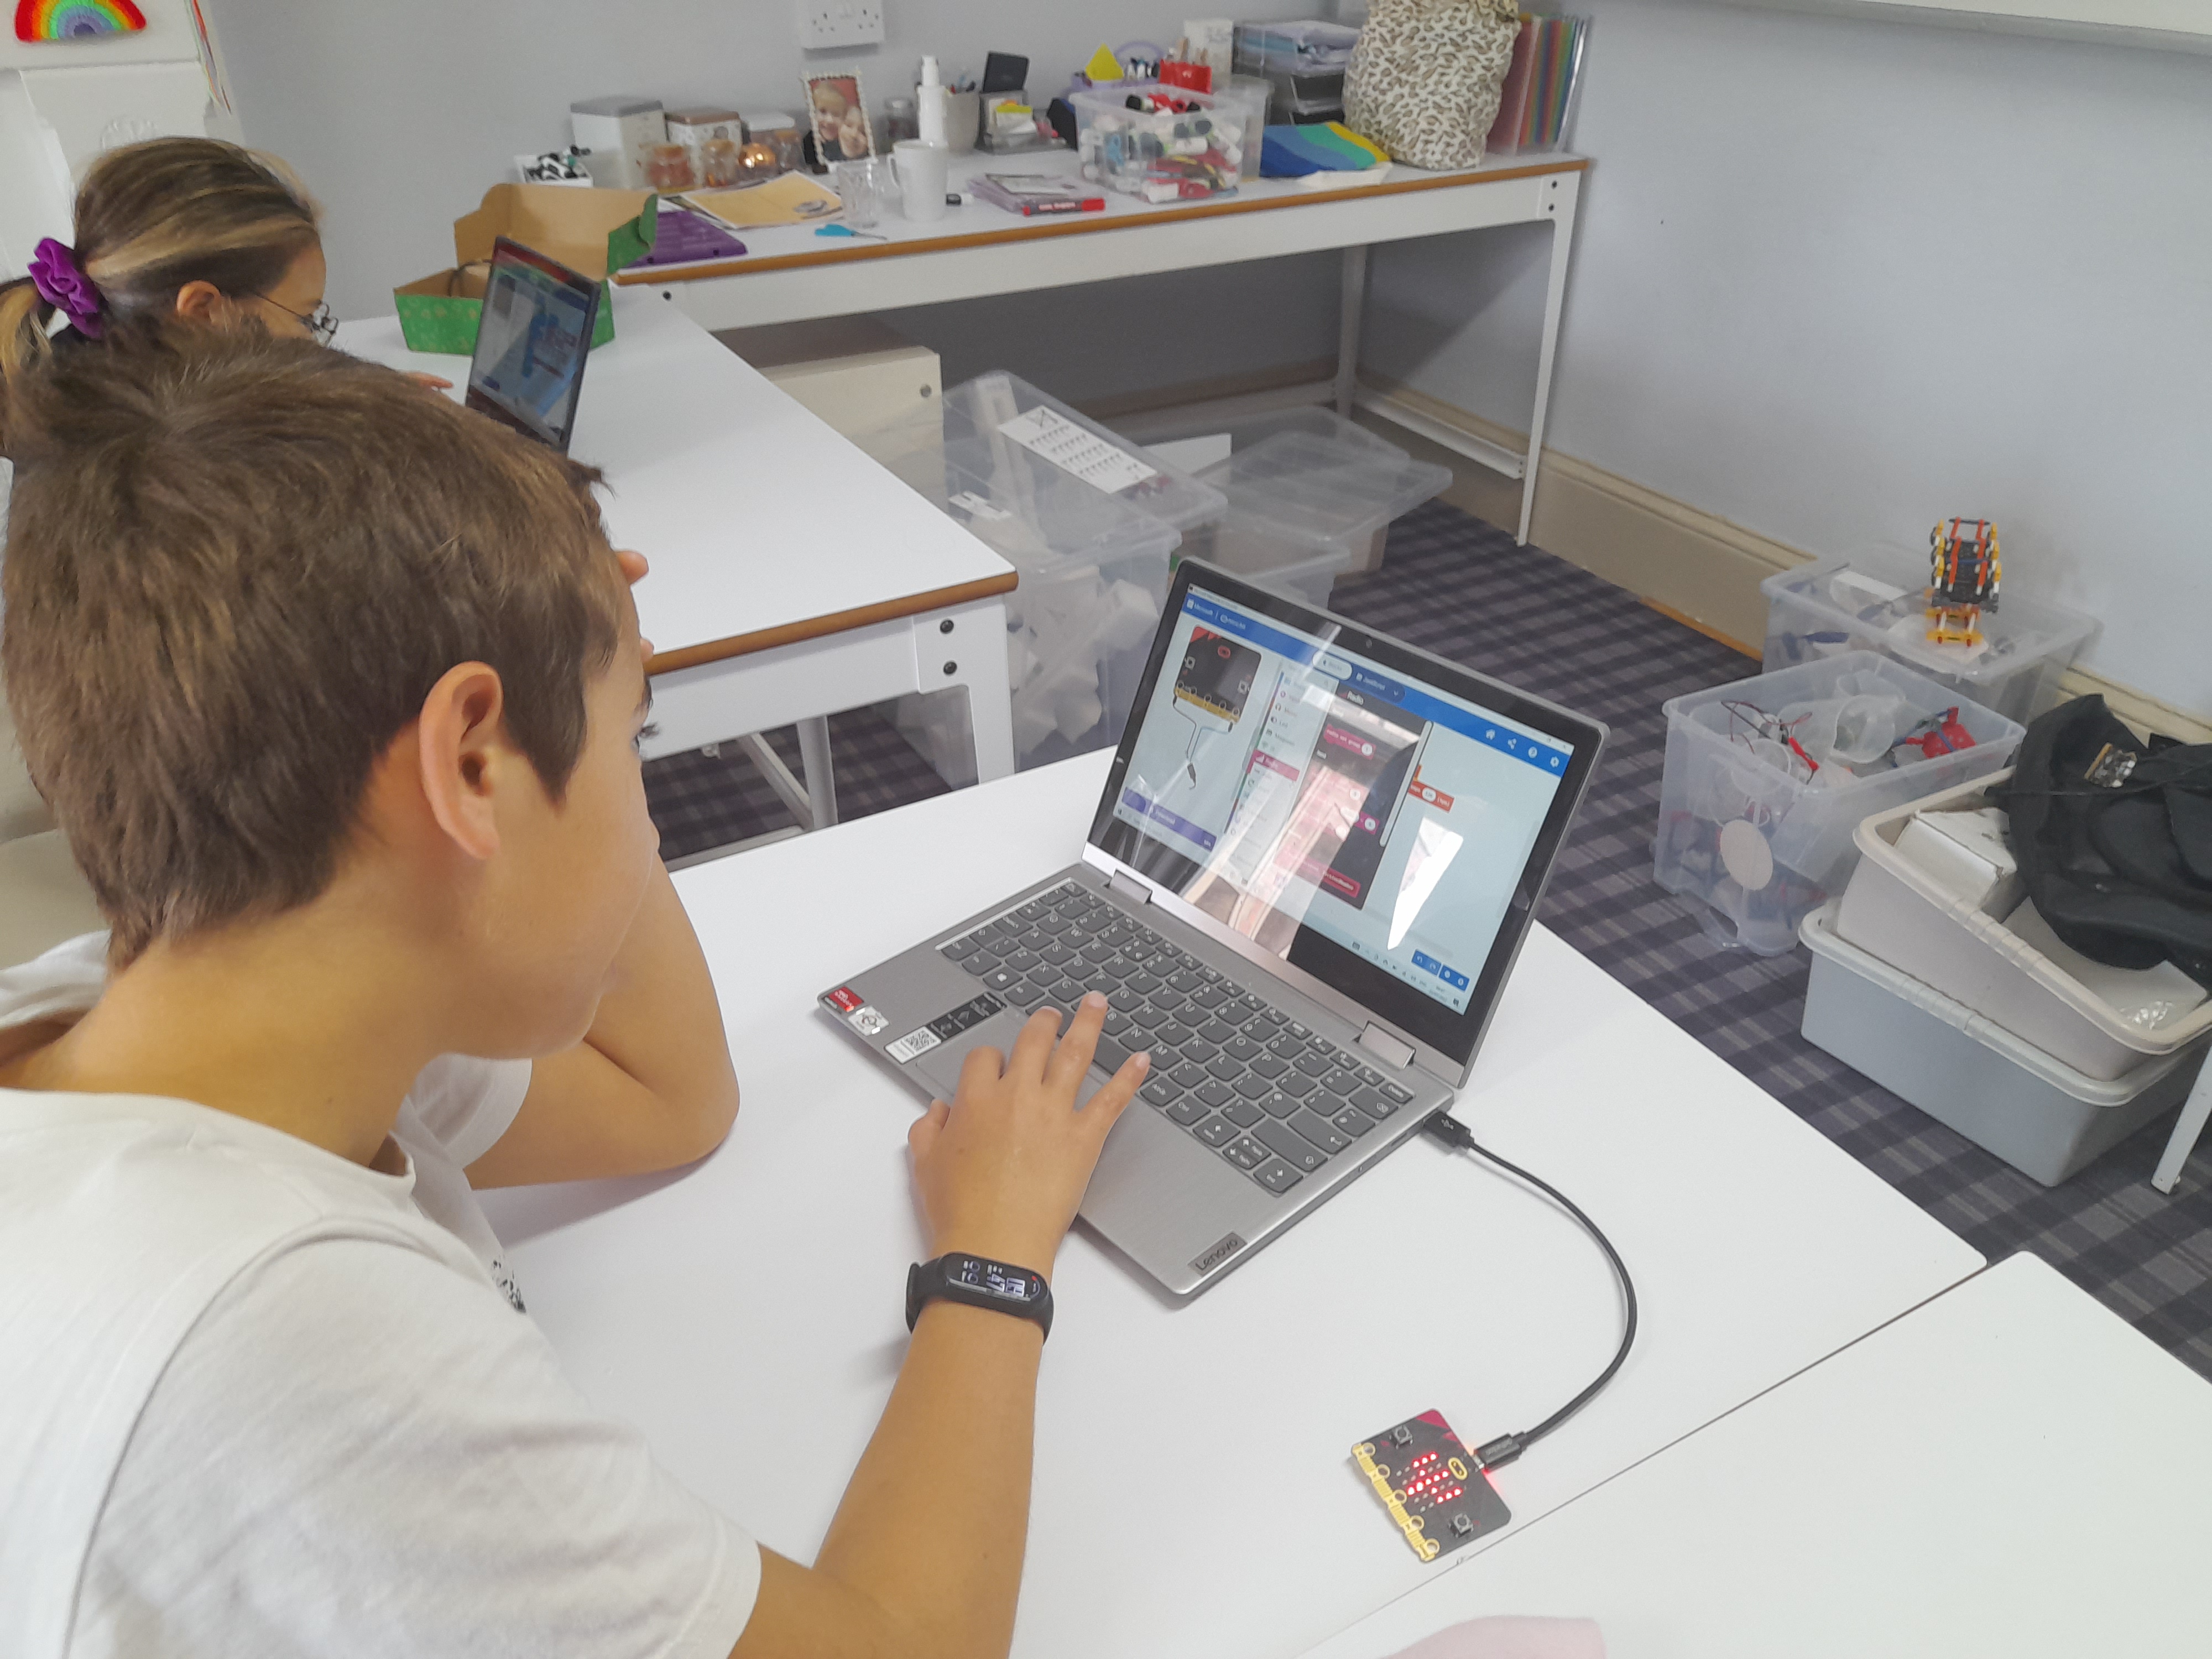 Student Coding on Laptop with the Microbit